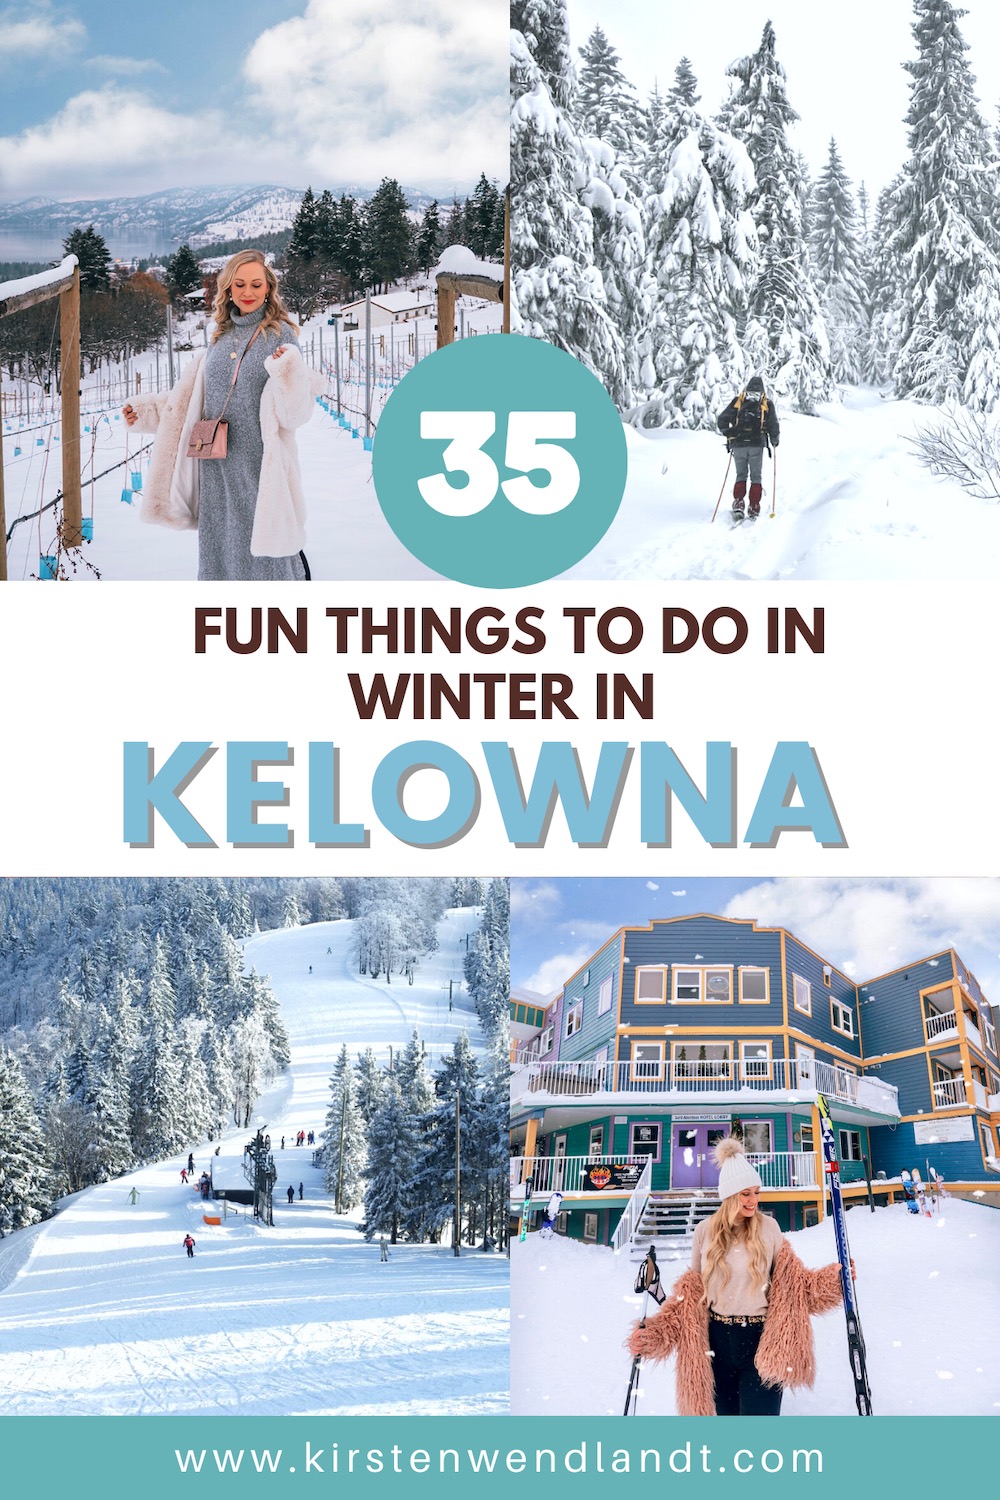 Although most people choose to visit Kelowna in the summer months, in my opinion Kelowna in winter is absolutely magical. Not only is the weather a lot more mild (typically) than the rest of Canada, but there’s just so much to see and do here. From exhilirating winter sports to wine tastings, cultural events and so much more. If you’re planning a trip to Kelowna this winter you won’t want to miss this guide to the best things to do in Kelowna in winter.